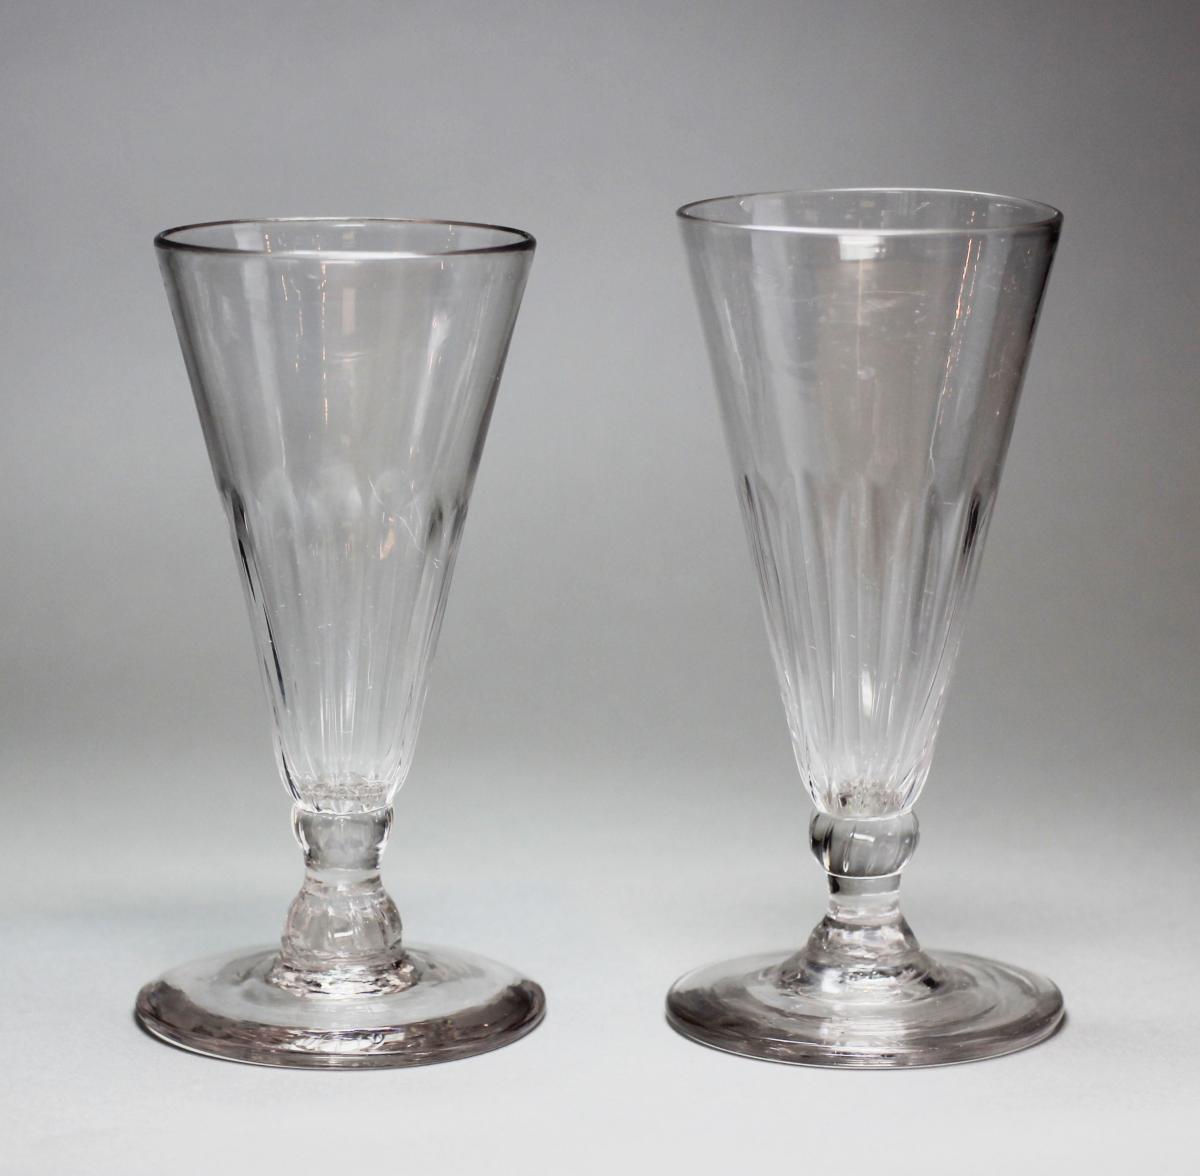 Two fluted drinking glasses, 18th century